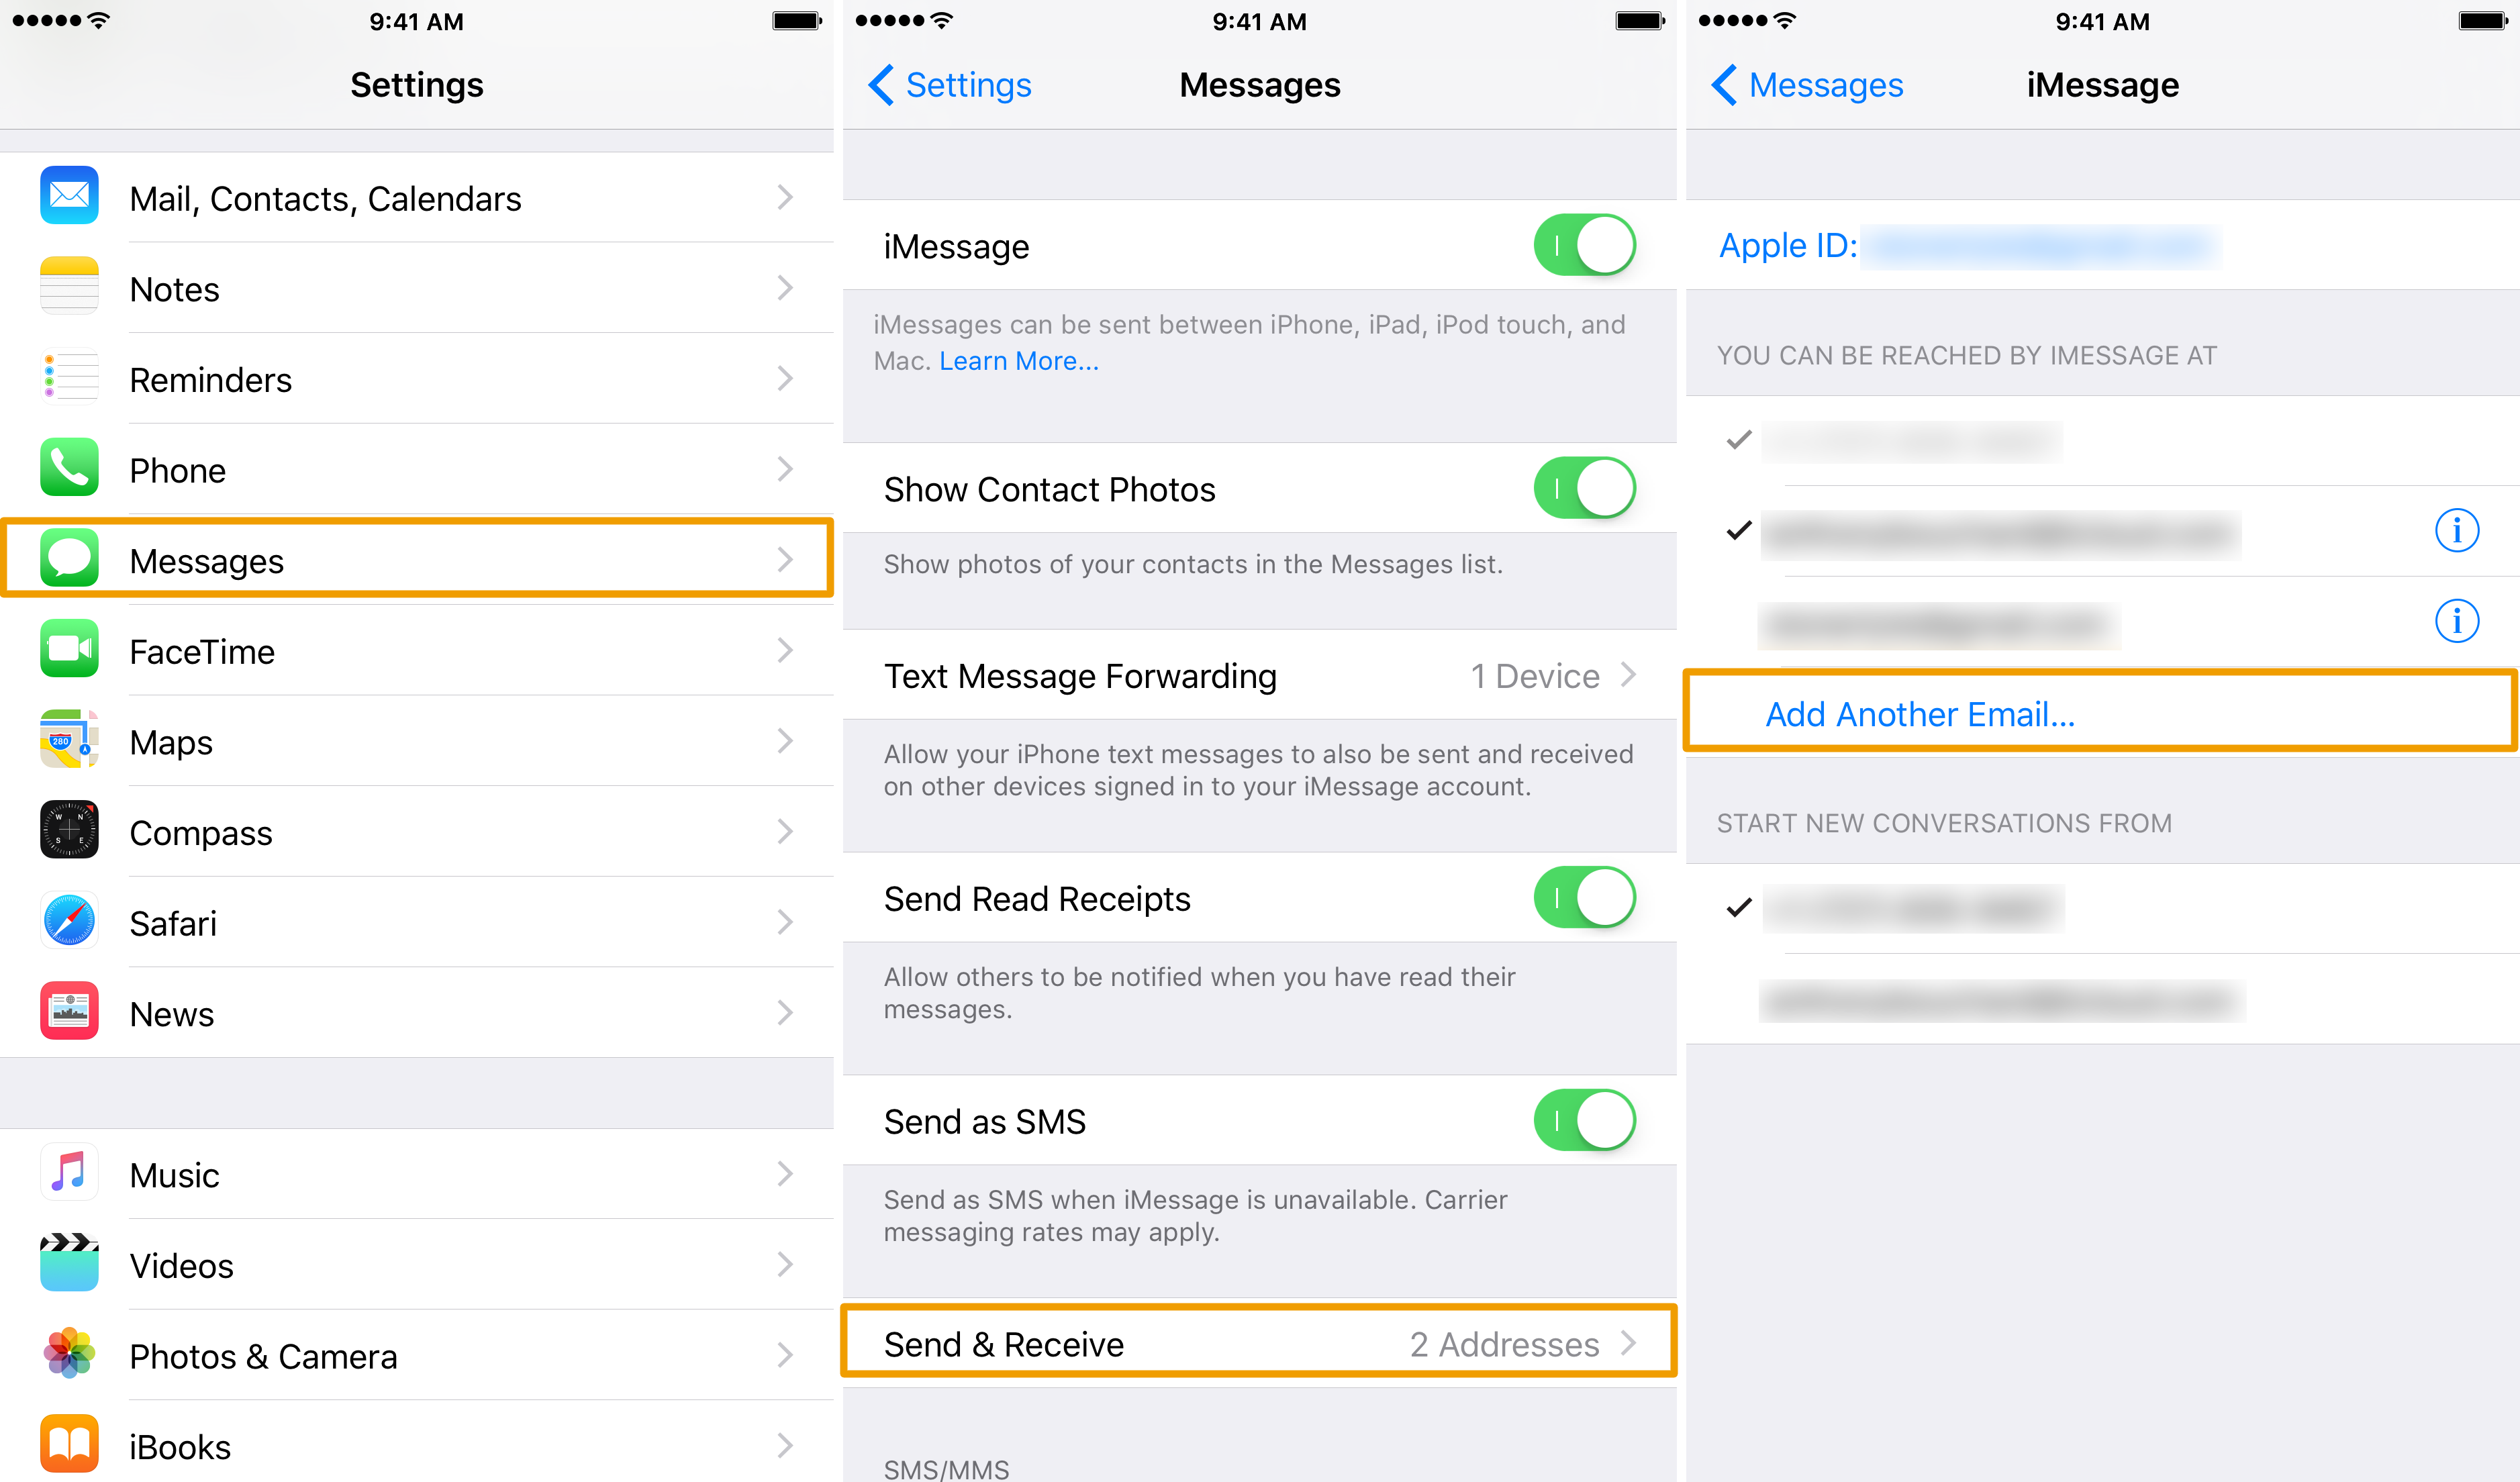 Tip: how to add a new email to your iMessage account in iOS